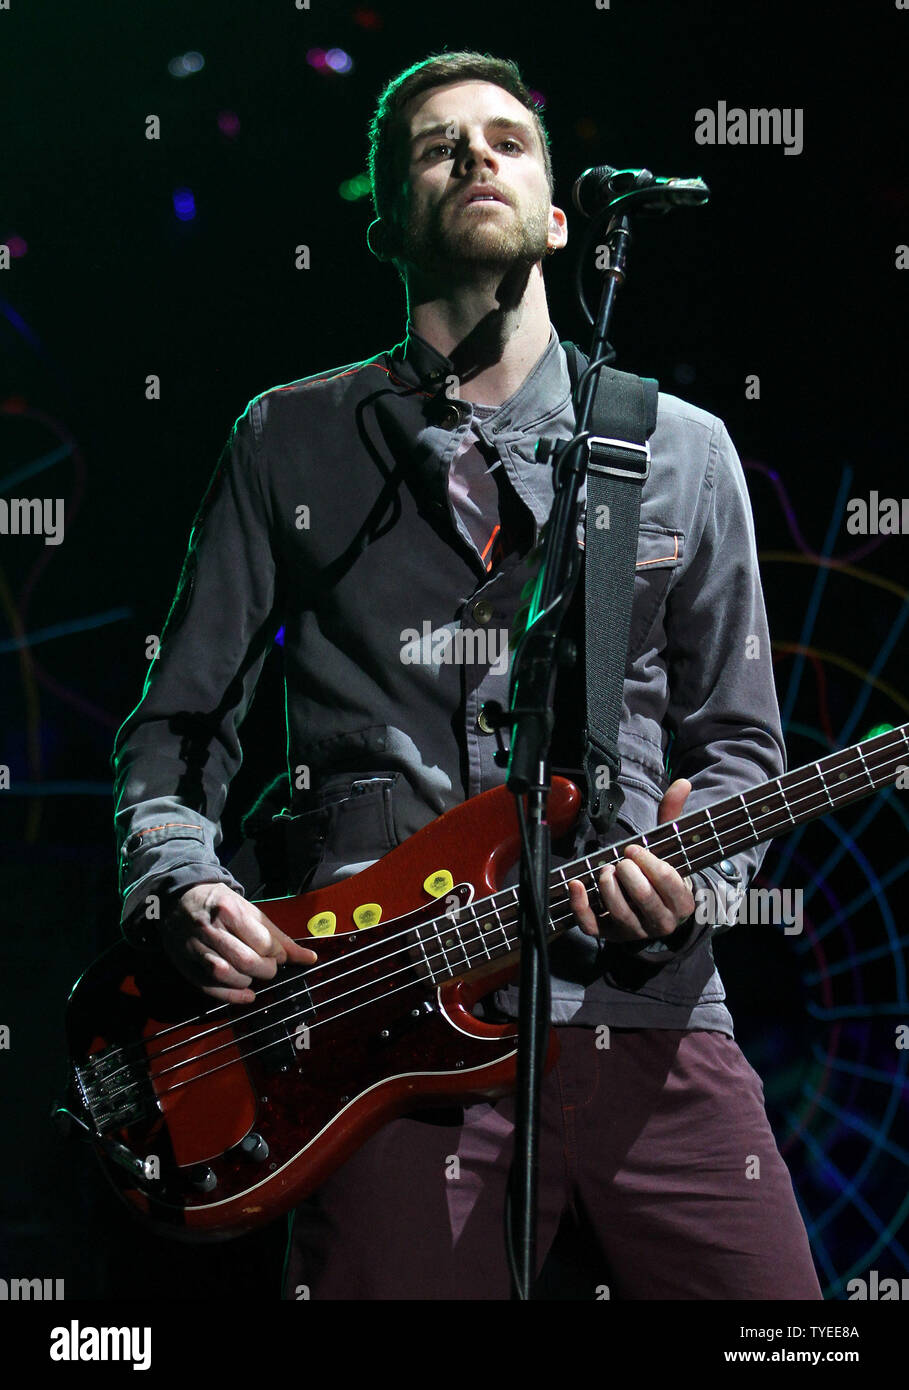 Guy Berryman with Coldplay performs in concert on their Mylo Xyloto tour 2012 at the American Airlines Arena in Miami on June 29, 2012. UPI/Michael Bush Stock Photo